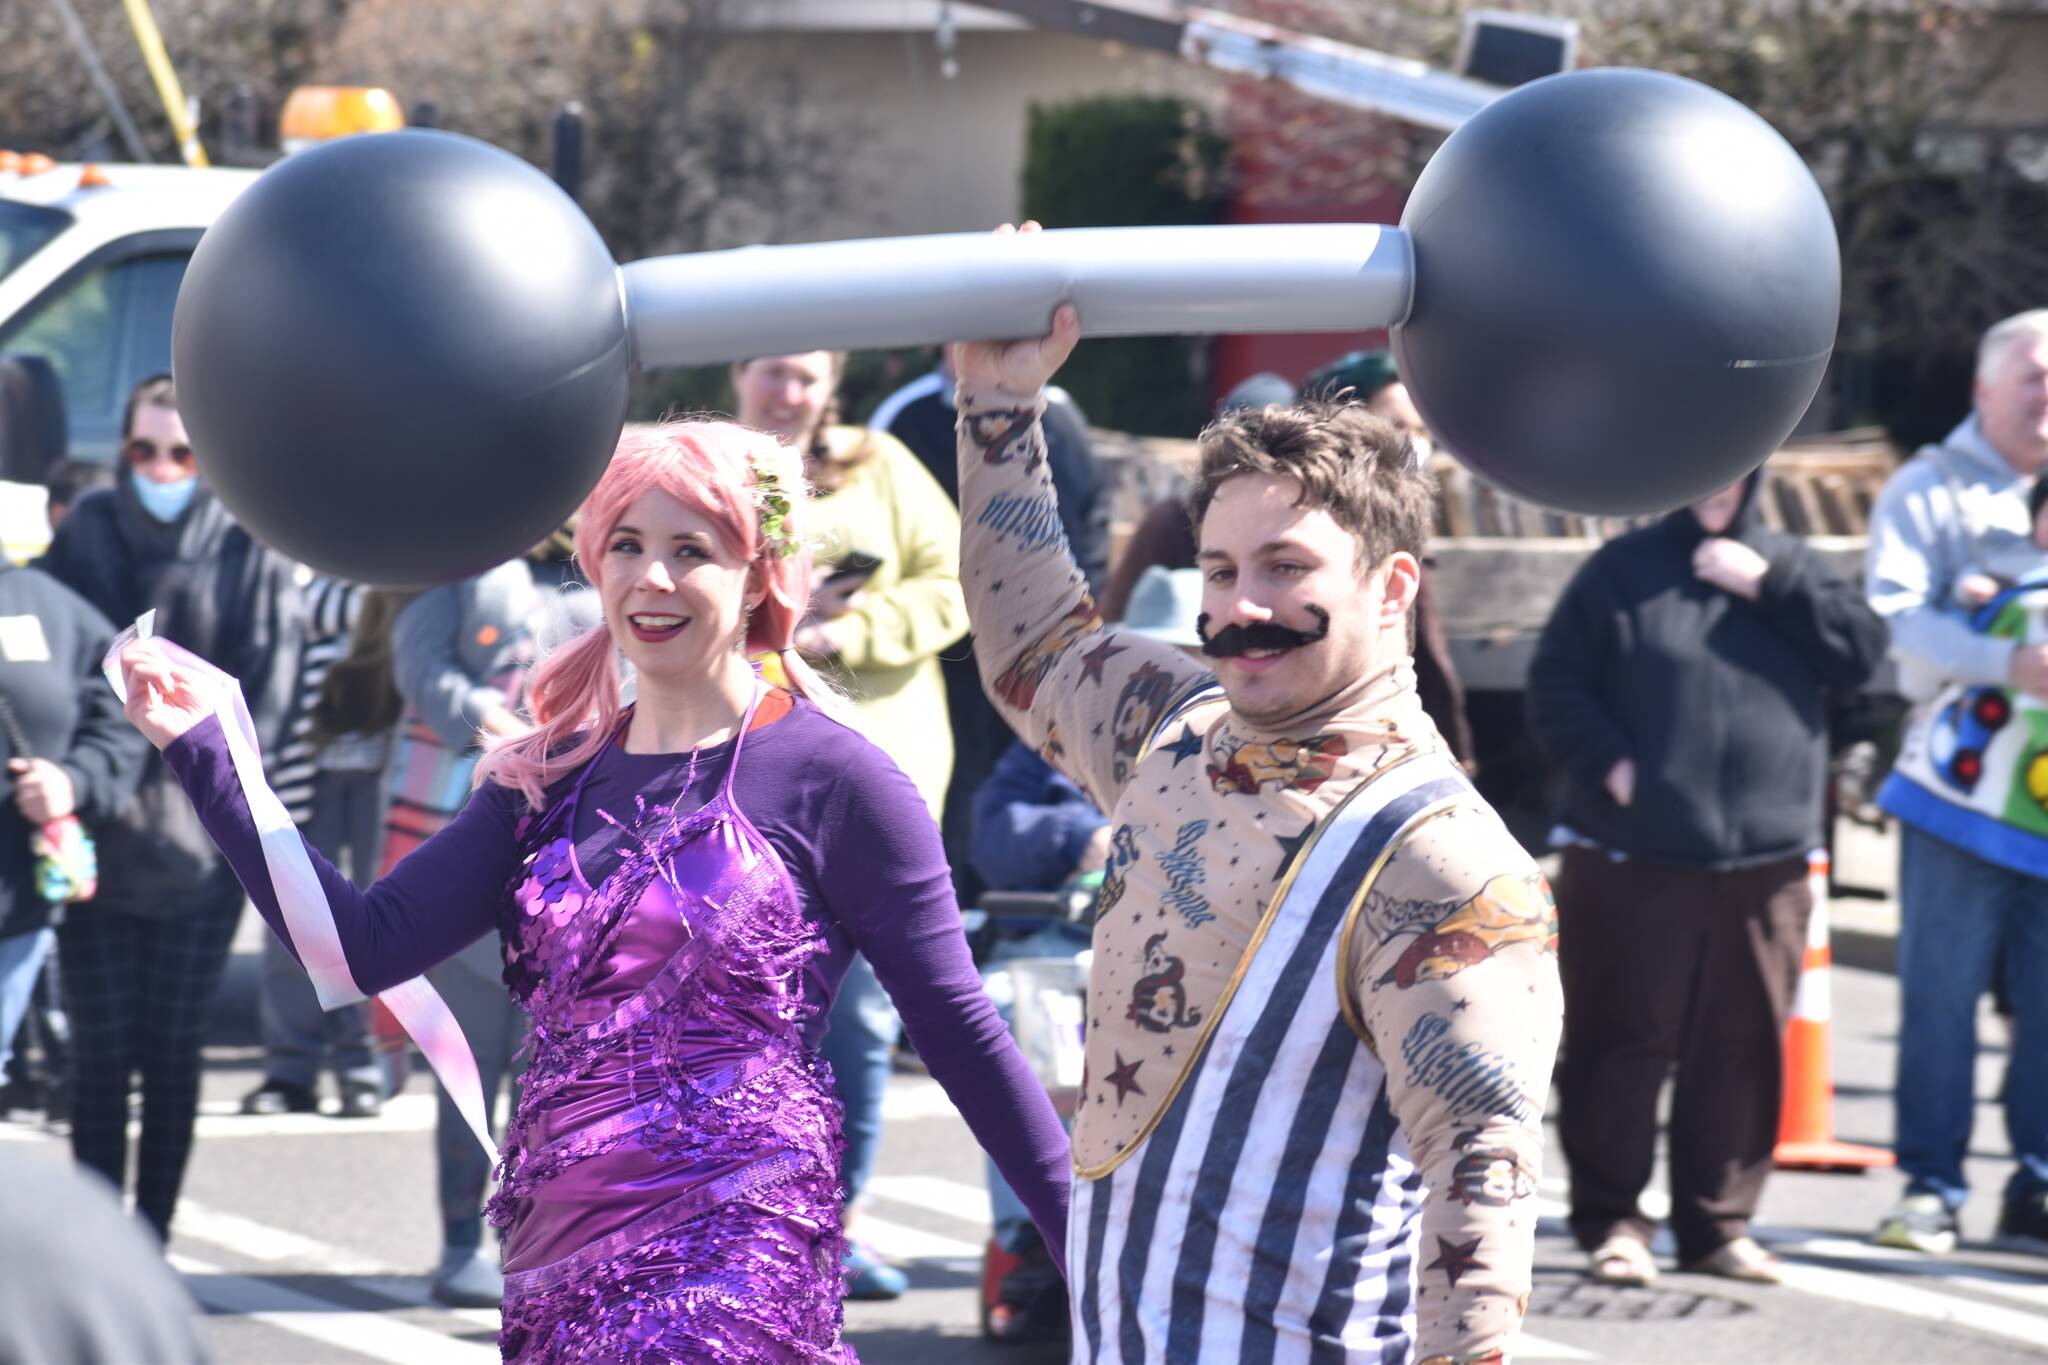 Entertainers in costume put on a show for the parade audience in Puyallup. Photo by Alex Bruell